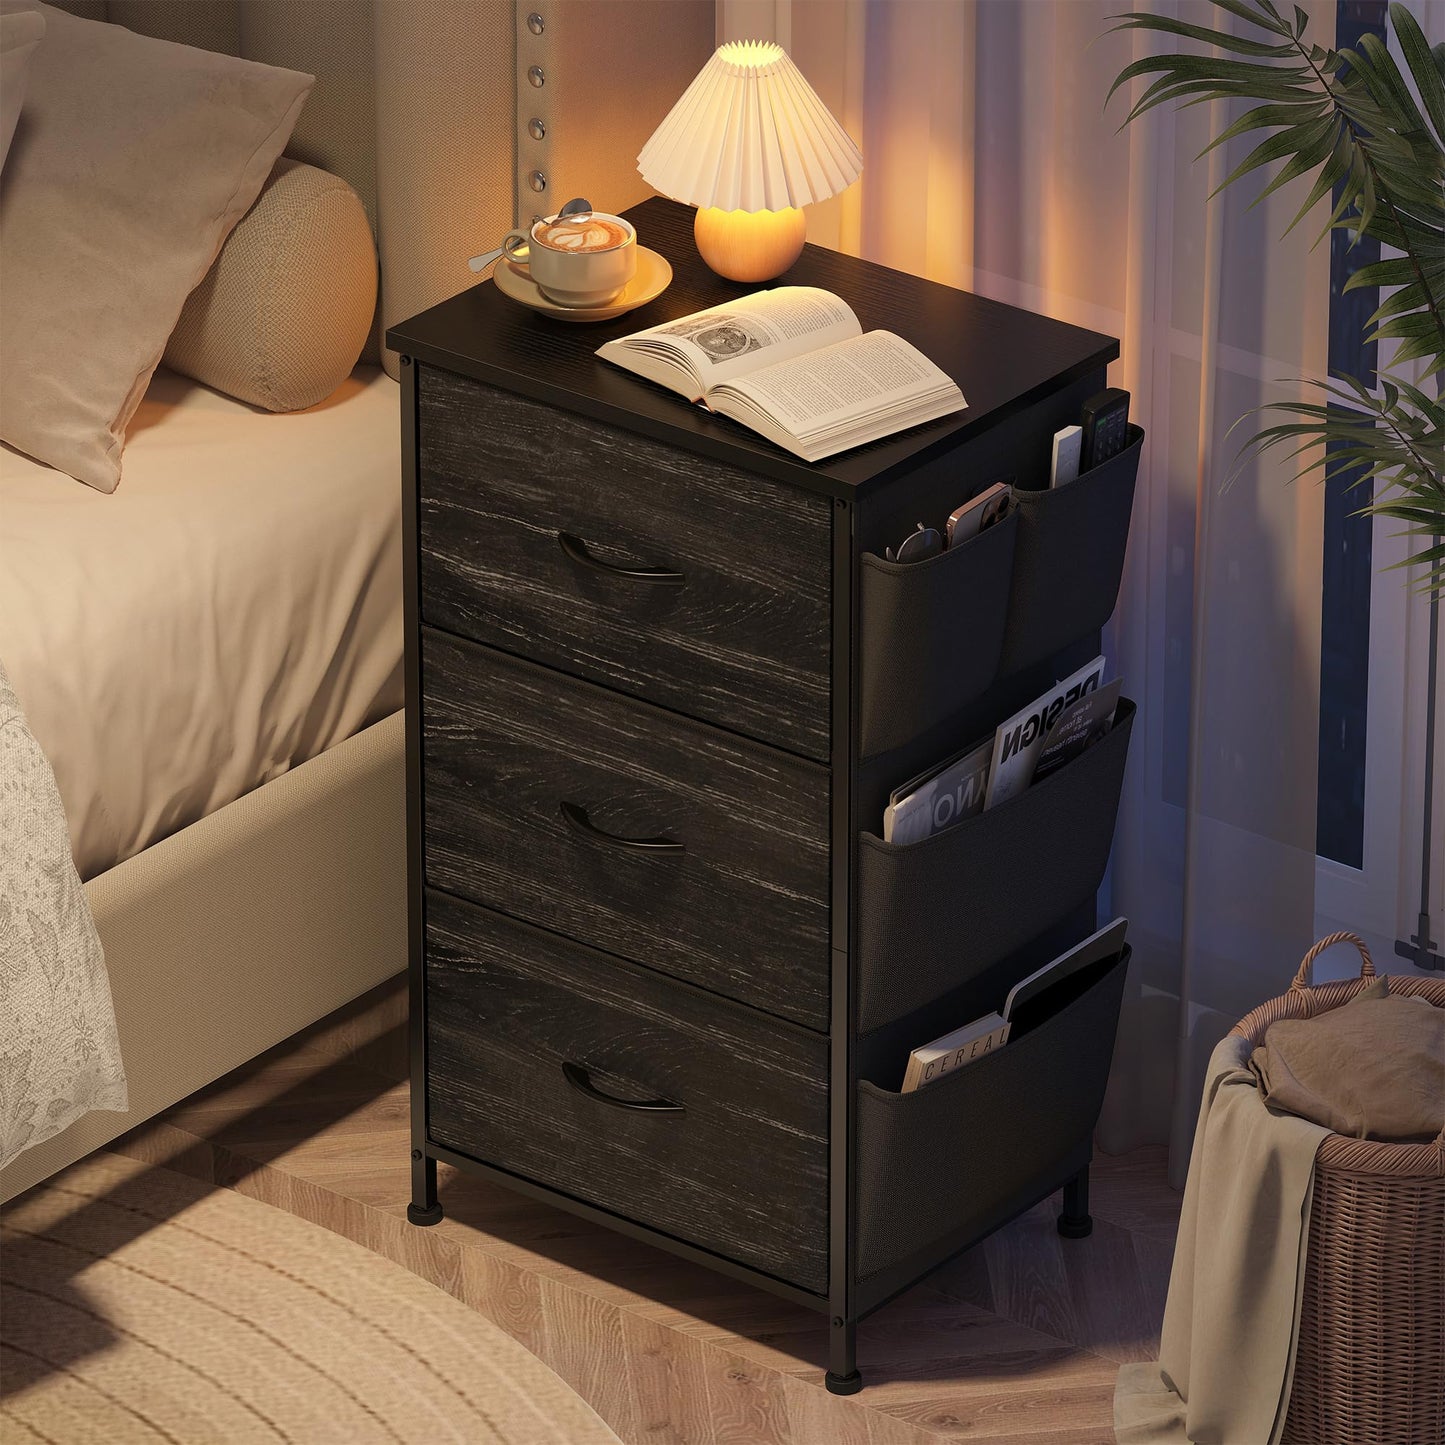 Hana Exports Nightstand with 3 Drawers, Night Stand for Bedroom, Bedside Table with Wooden Top, Sturdy Steel Frame End Table, Small Dresser for Bedroom, Living Room, Black